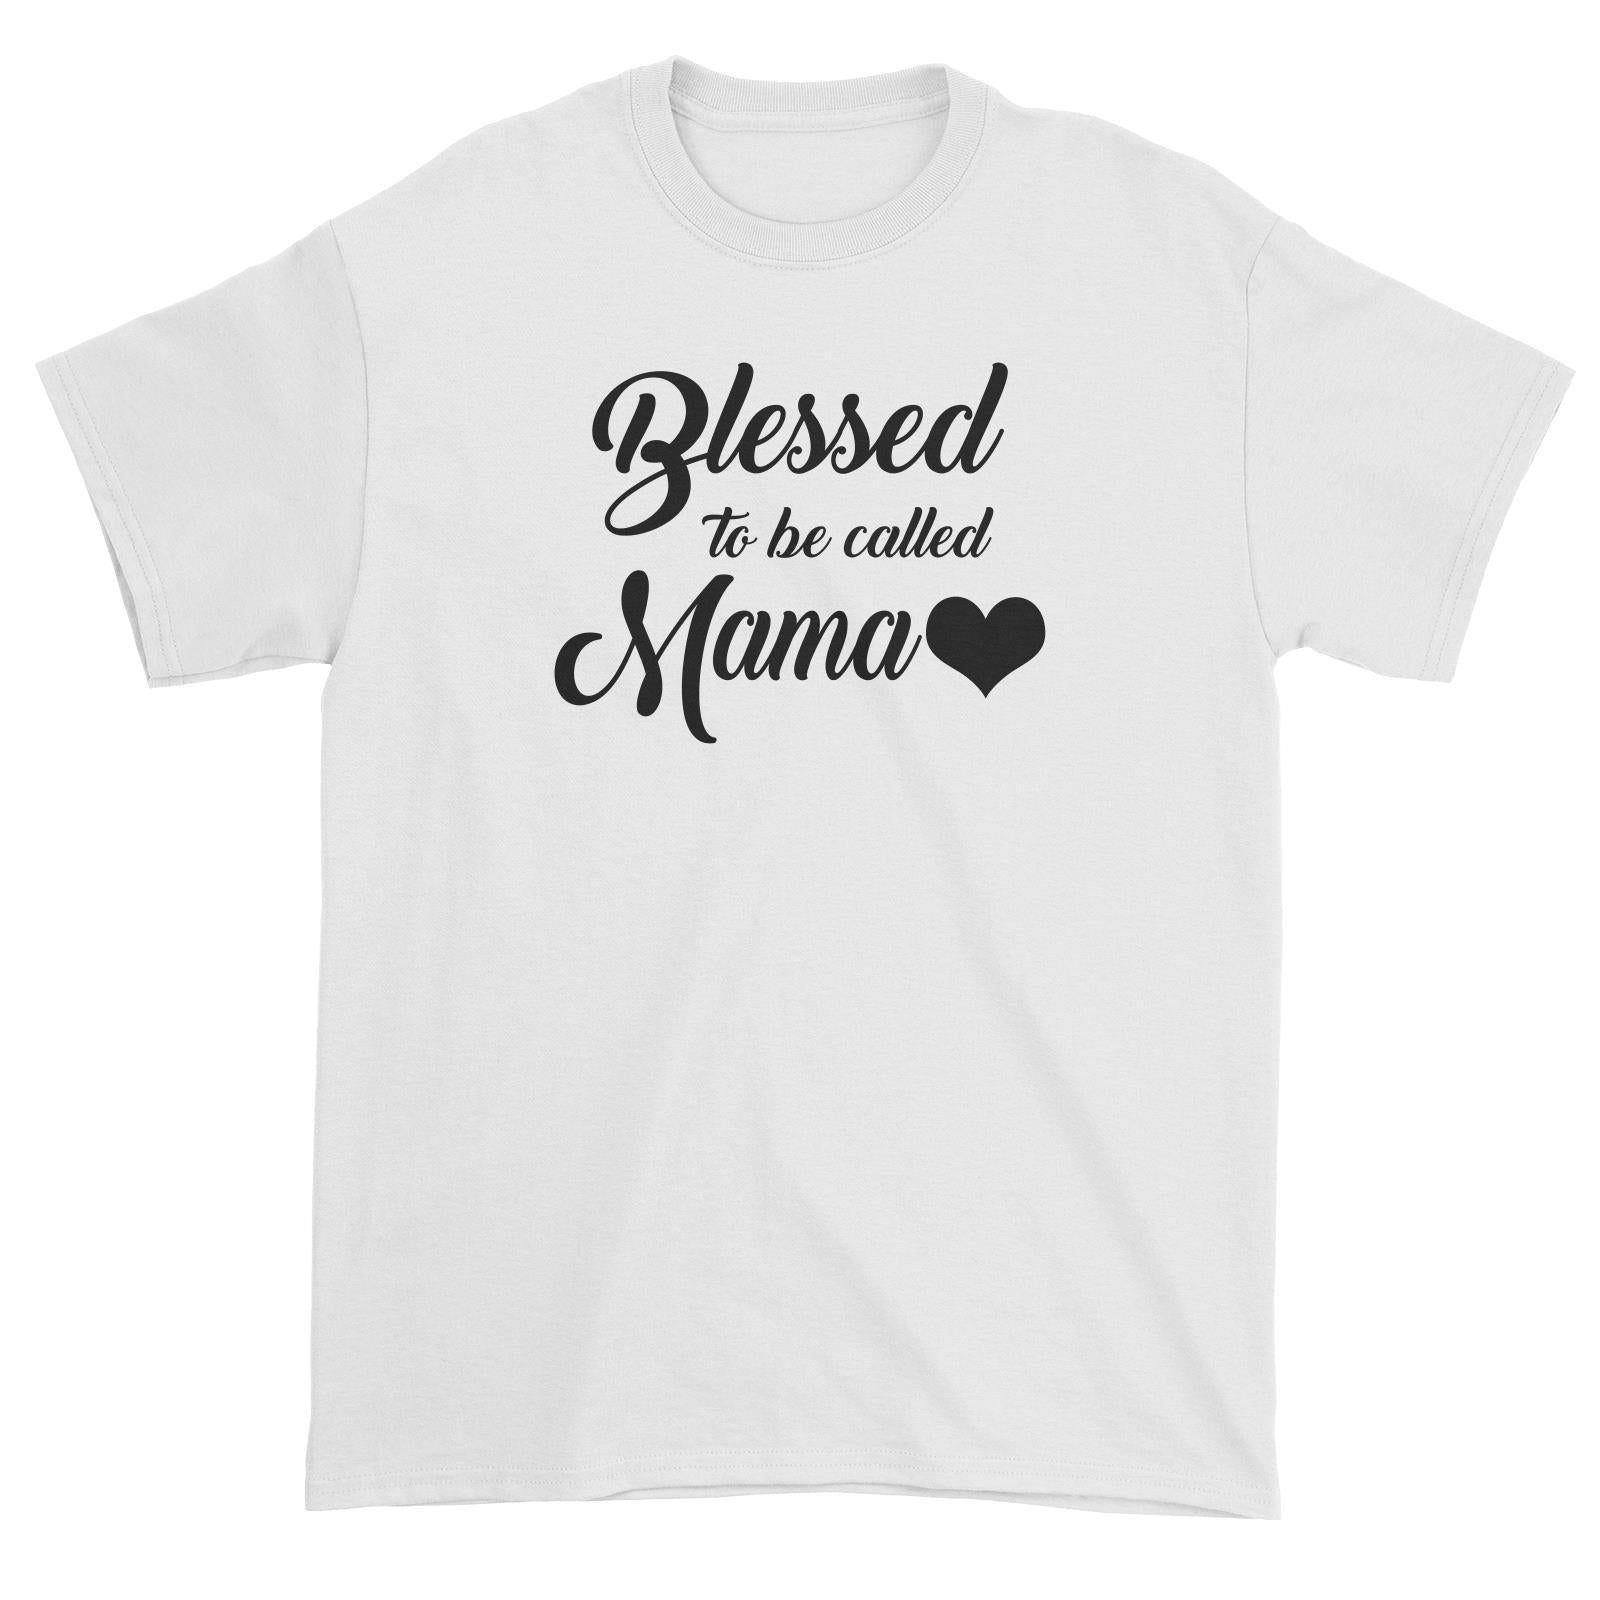 Blessed To Be Called Mama Unisex T-Shirt Matching Family Love Blessing